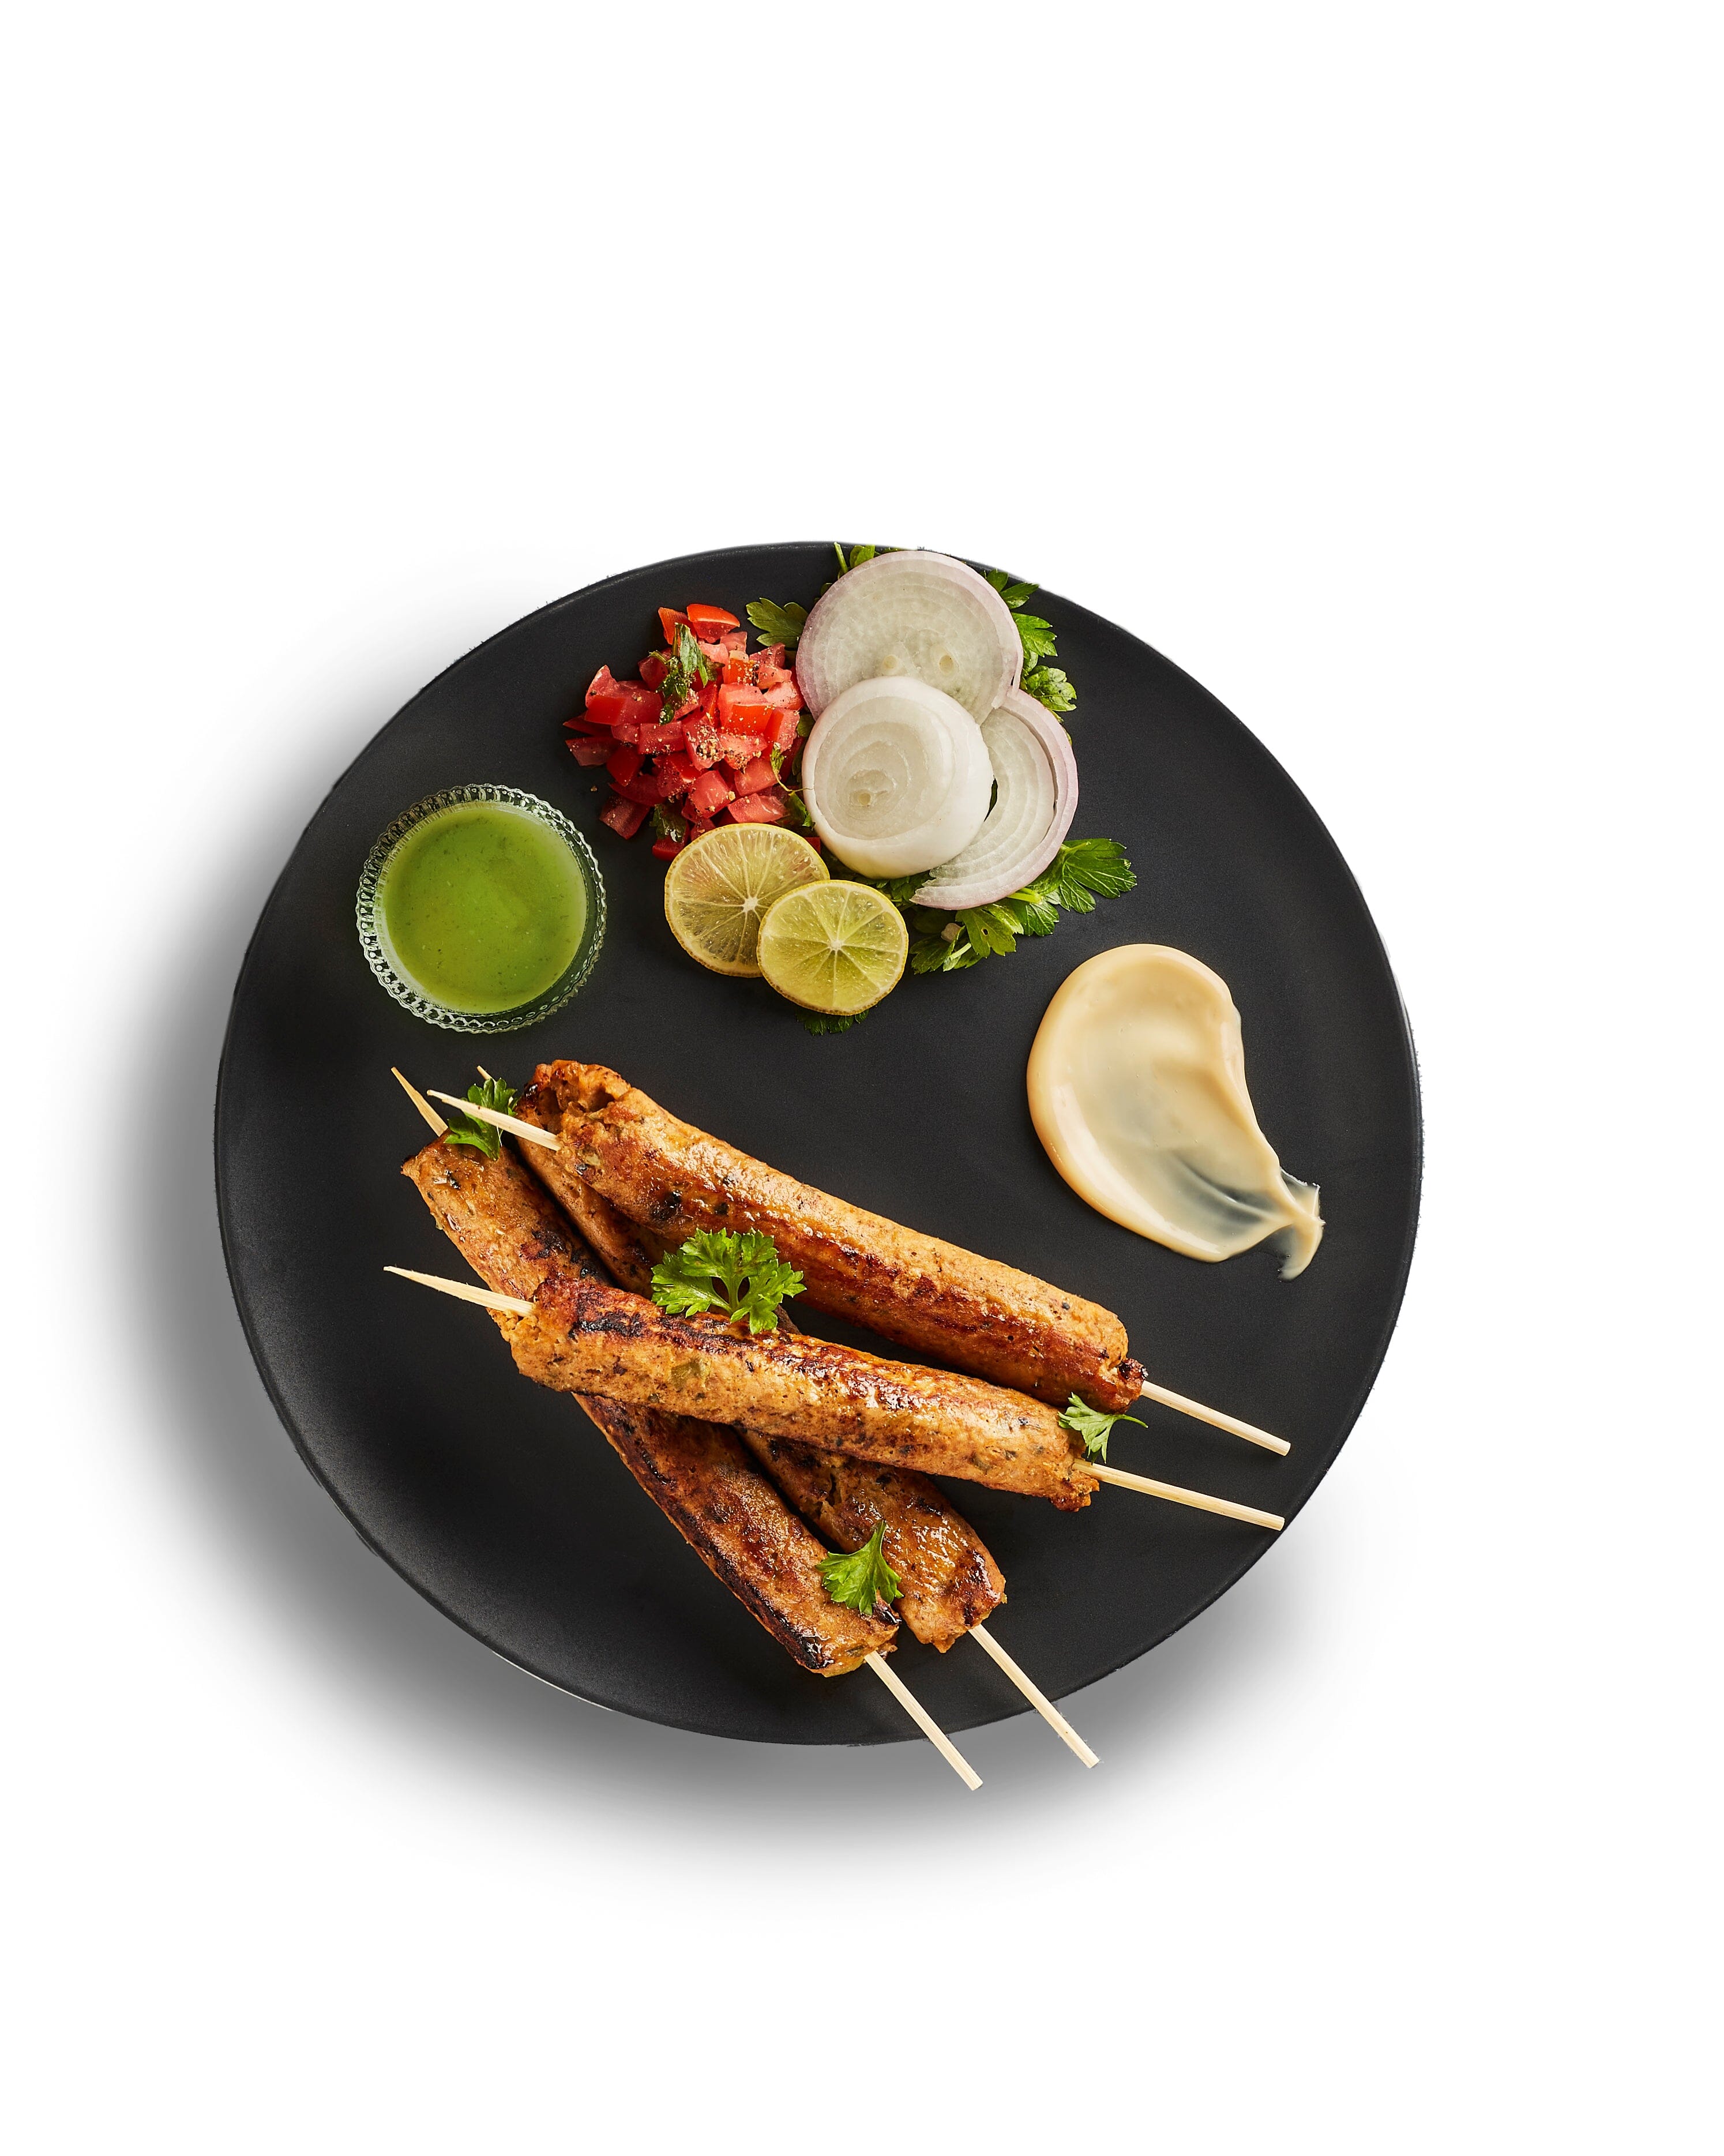 Chicken Like Seekh Kebab/Chicken Like Sausages - Grill Master's Combo (500gm each) continental greenbird 